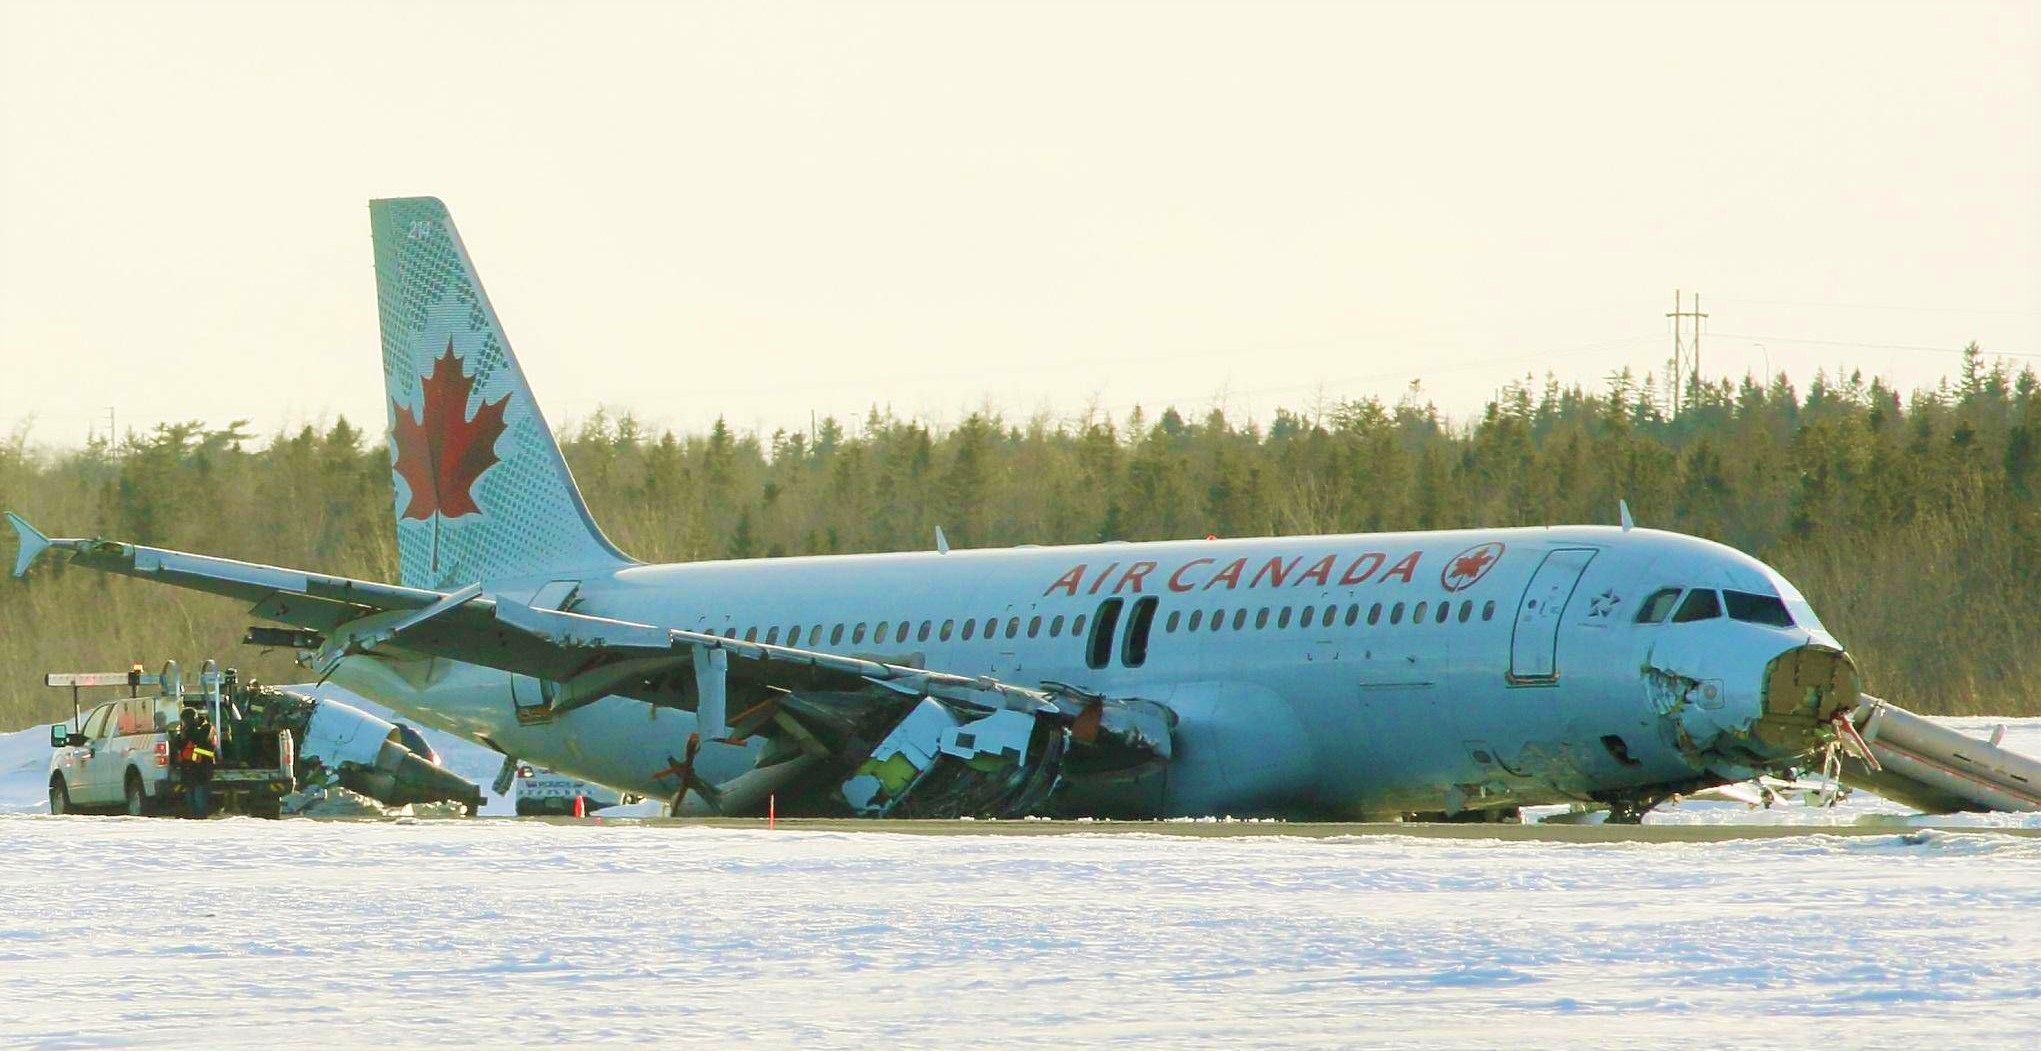 Supreme Court of Canada  nod  an  appeal  in  the case  of  an  Air Canada  A320  aircraft  crash at Halifax's Stanfield International Airport in March 2015 !